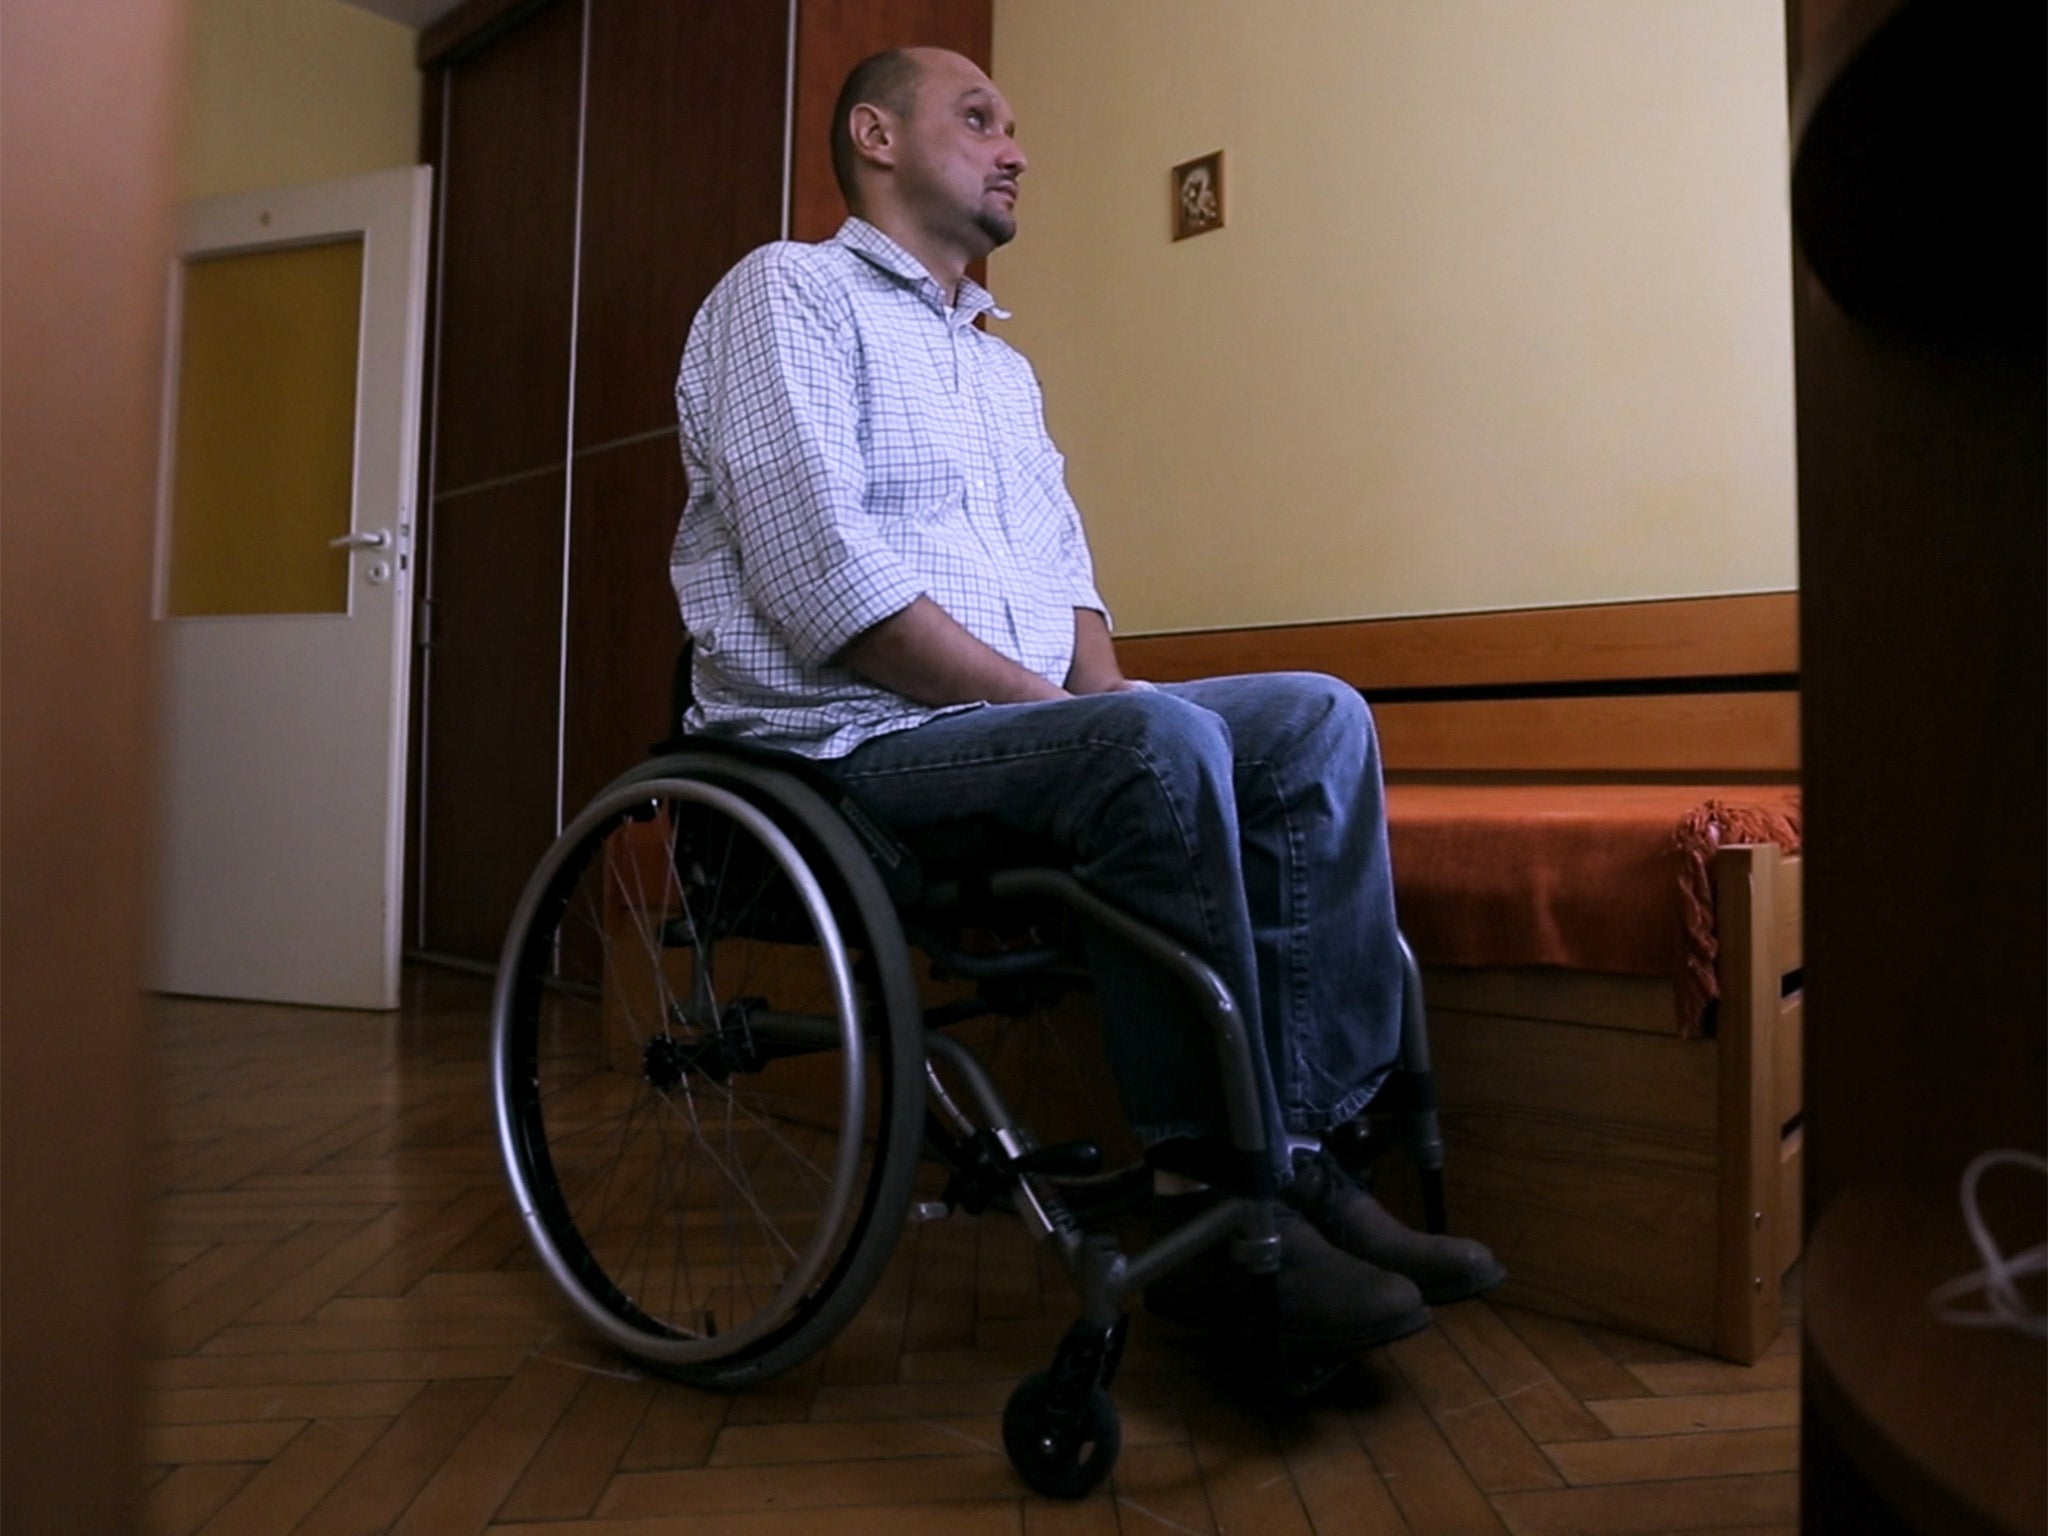 New hope: Darek Fidyka, who has been able to walk again thanks to pioneering treatment